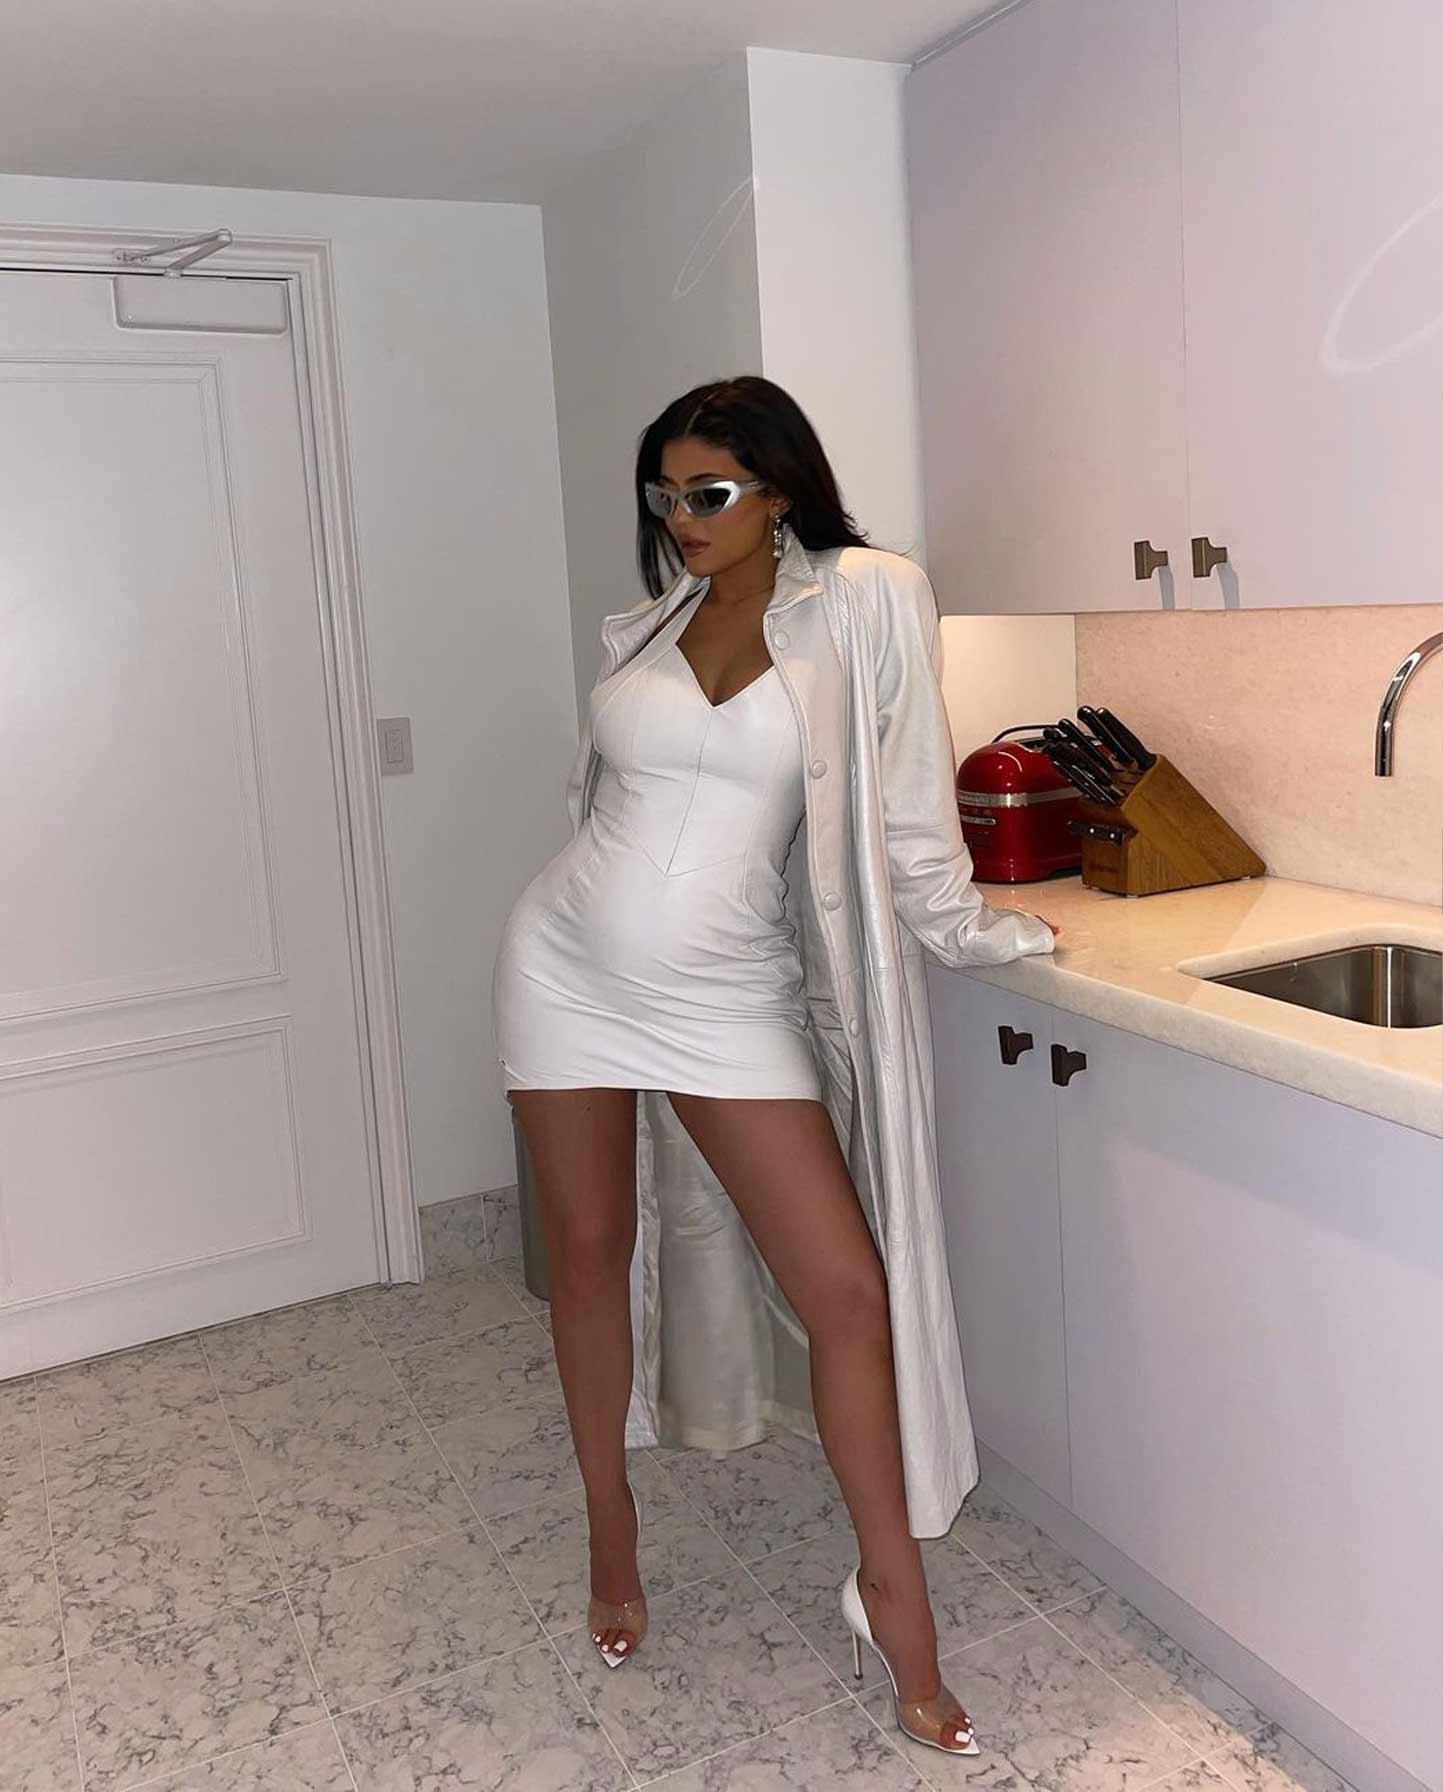 Kylie Jenner in a white latex outfit with her baby bump showing.